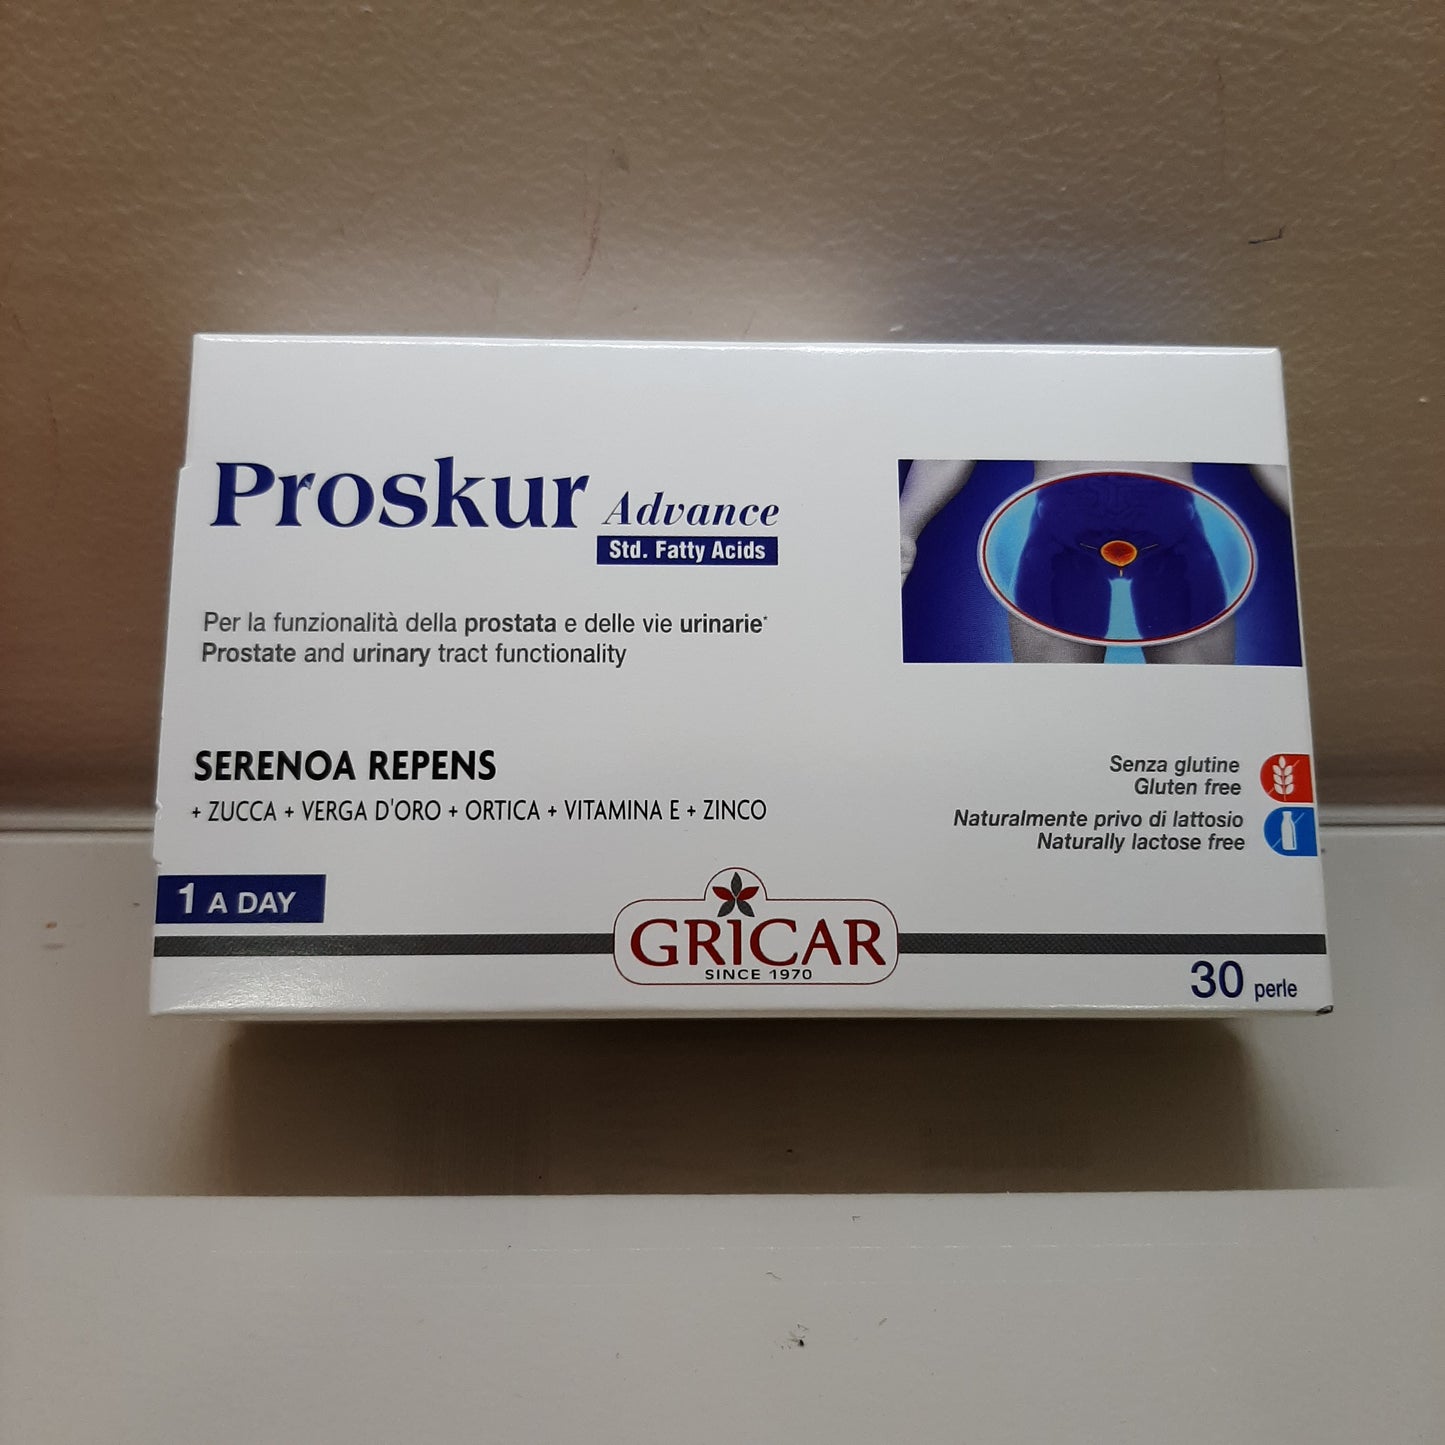 Proskur advance prostate and urinary tract functionality 30 pearls expiry 12/2024 net weight 27.39 g. Gricar 